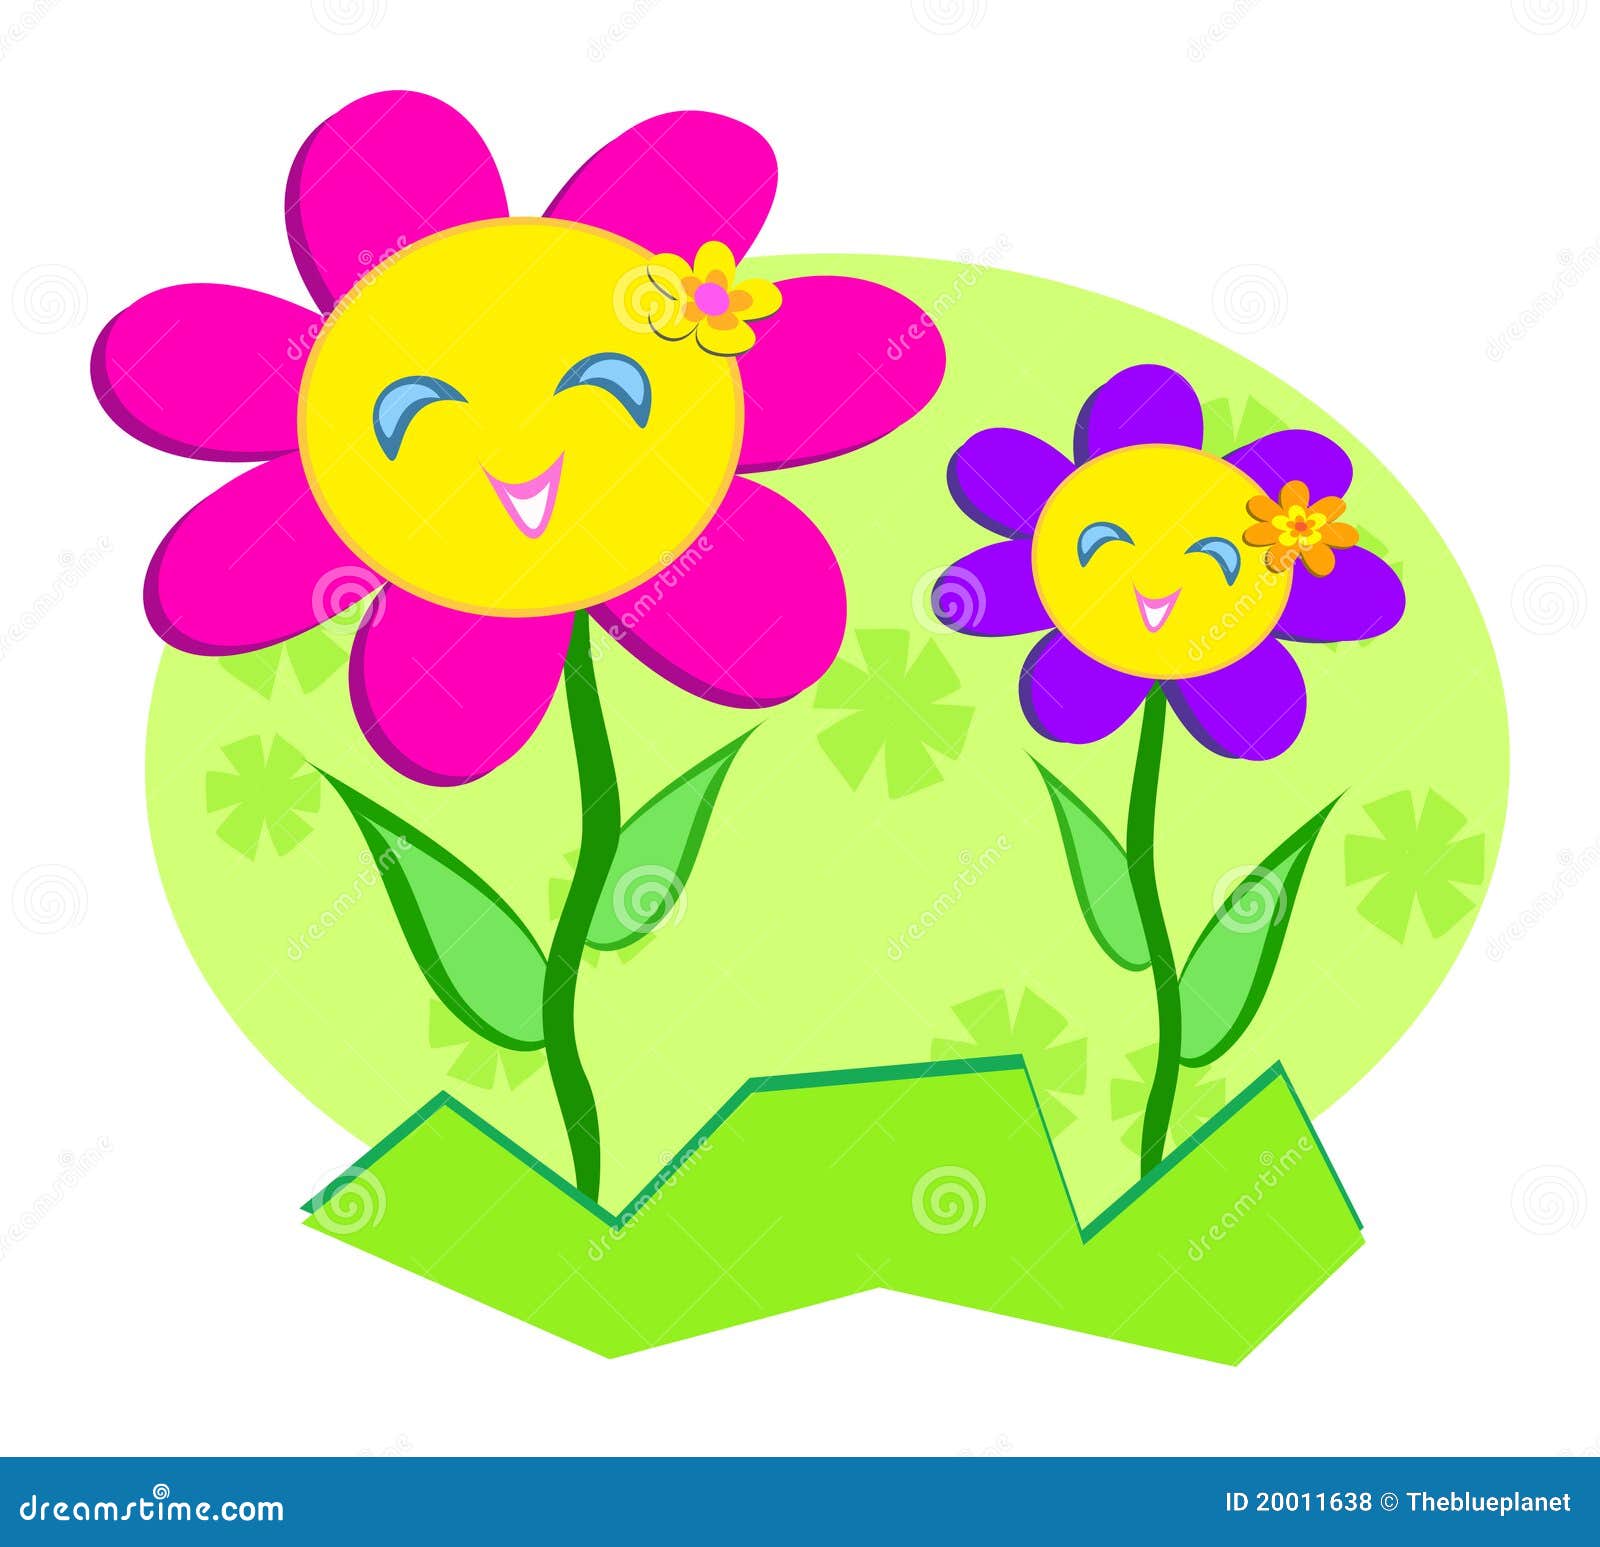 free clipart happy flower - photo #36